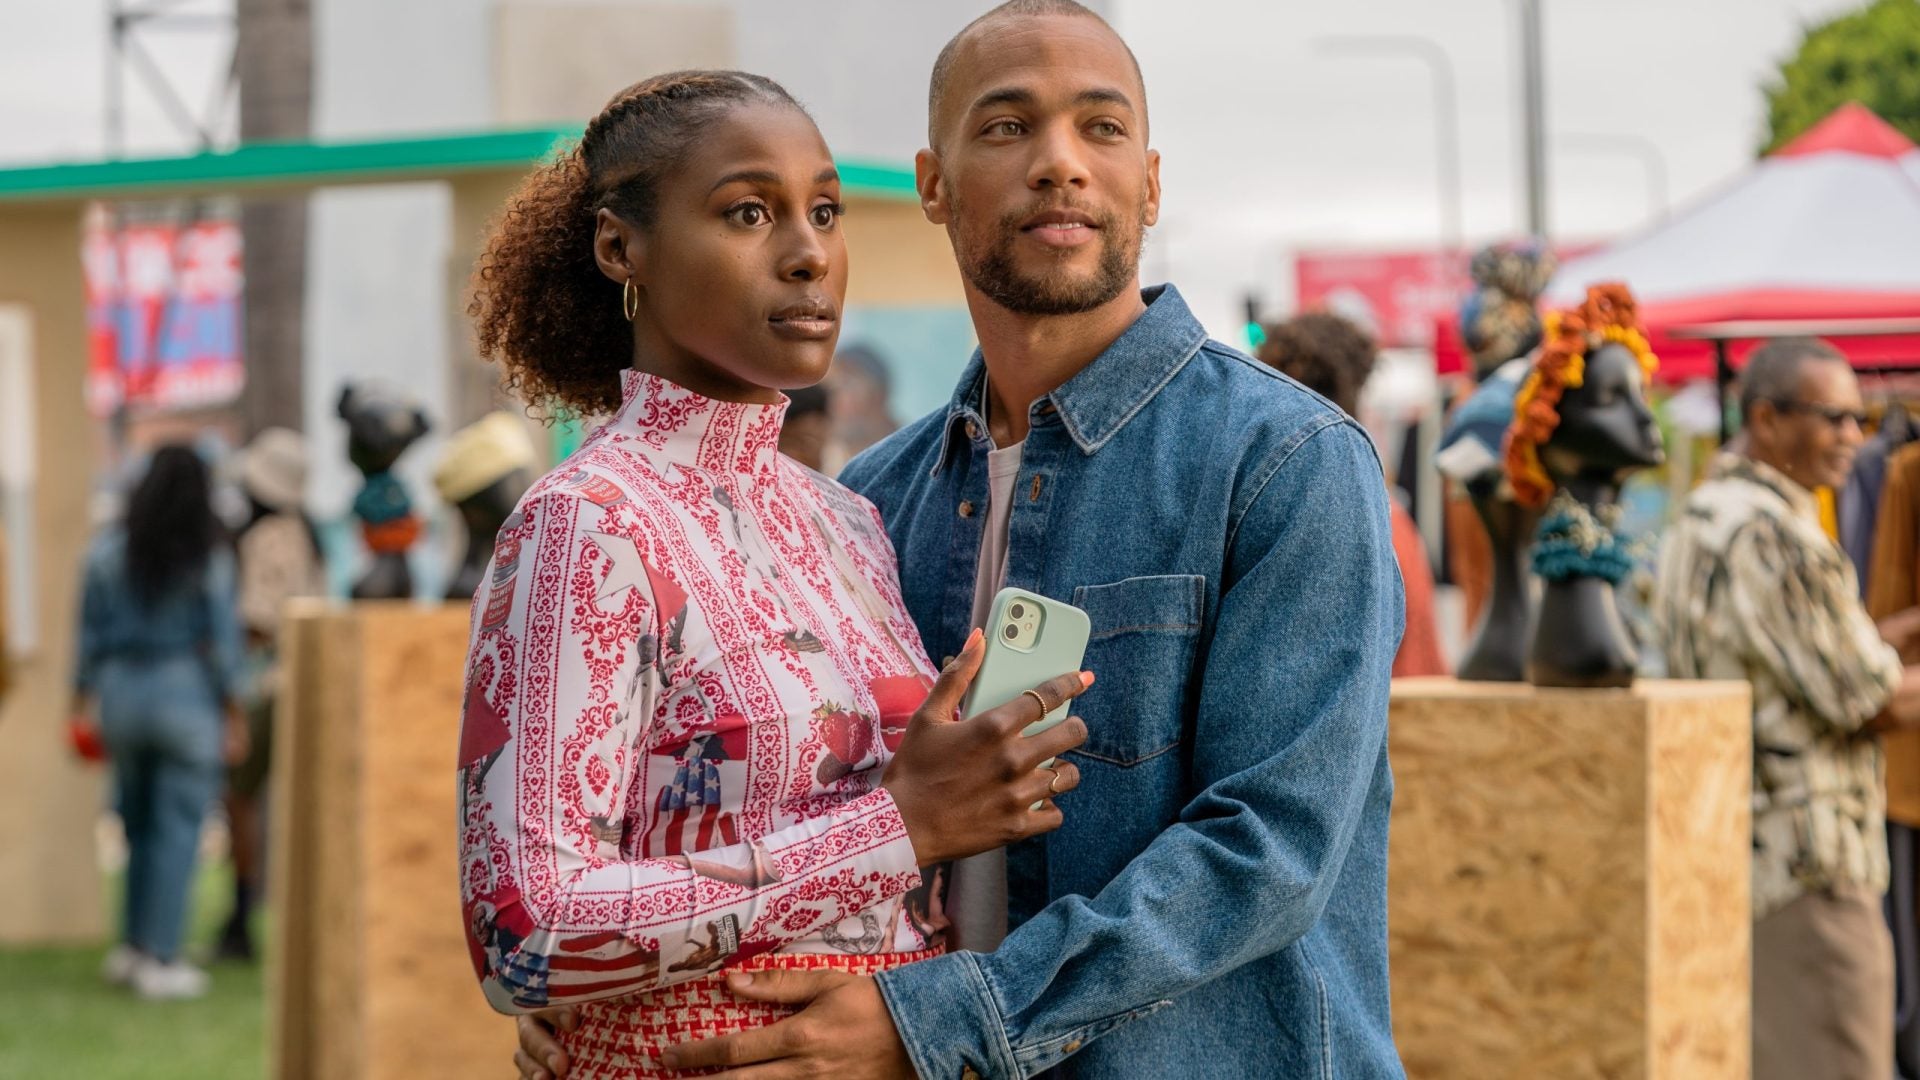 You Have Choices, Okay? 5 Mental Health Lessons From That Roller Coaster Ride Of An ‘Insecure’ Episode